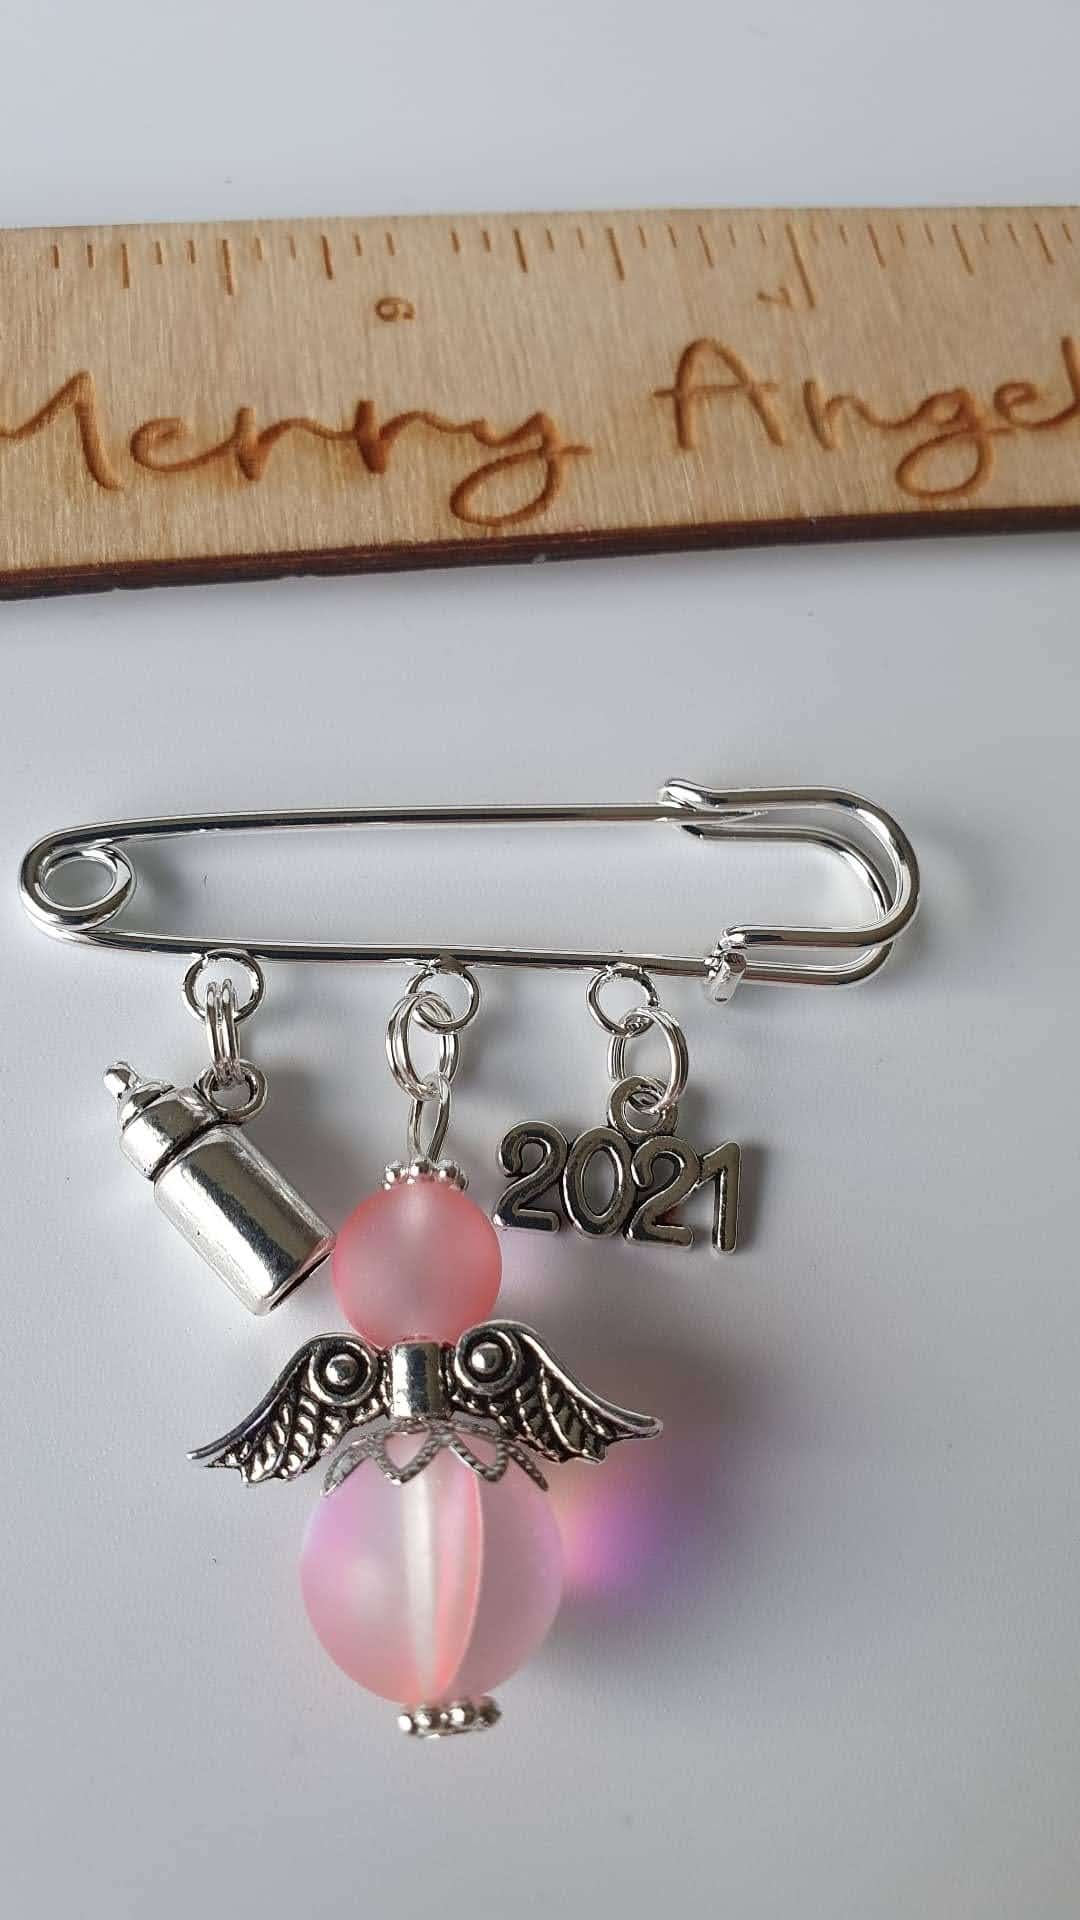 A silver plated pram pin with a silver bottle charm, a pink angel with silver wings, and a silver 2021 charm.